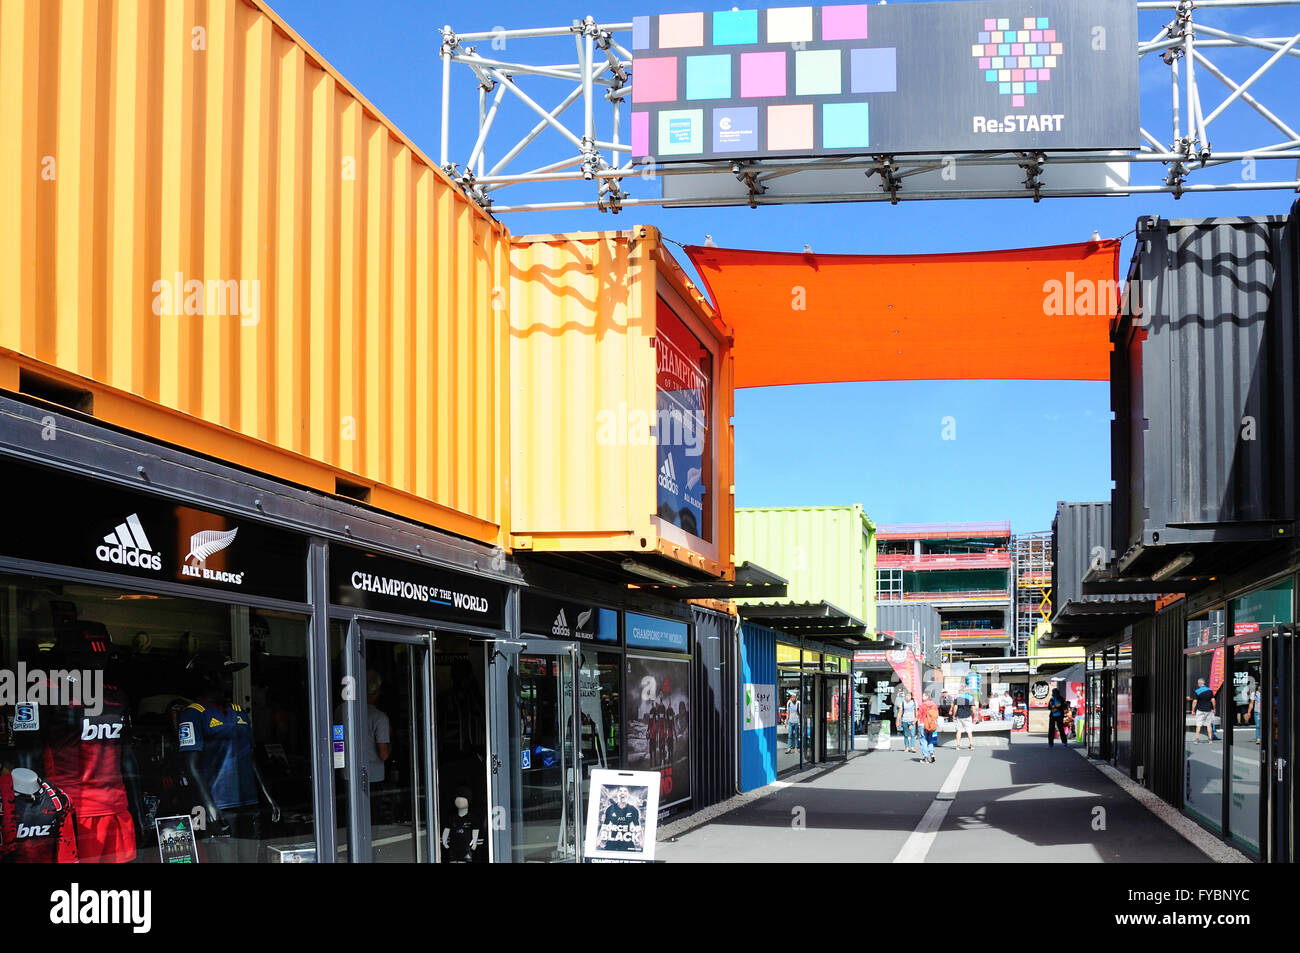 Entrance to Re:START Container Mall, Cashel Street, Christchurch, Canterbury, New Zealand Stock Photo